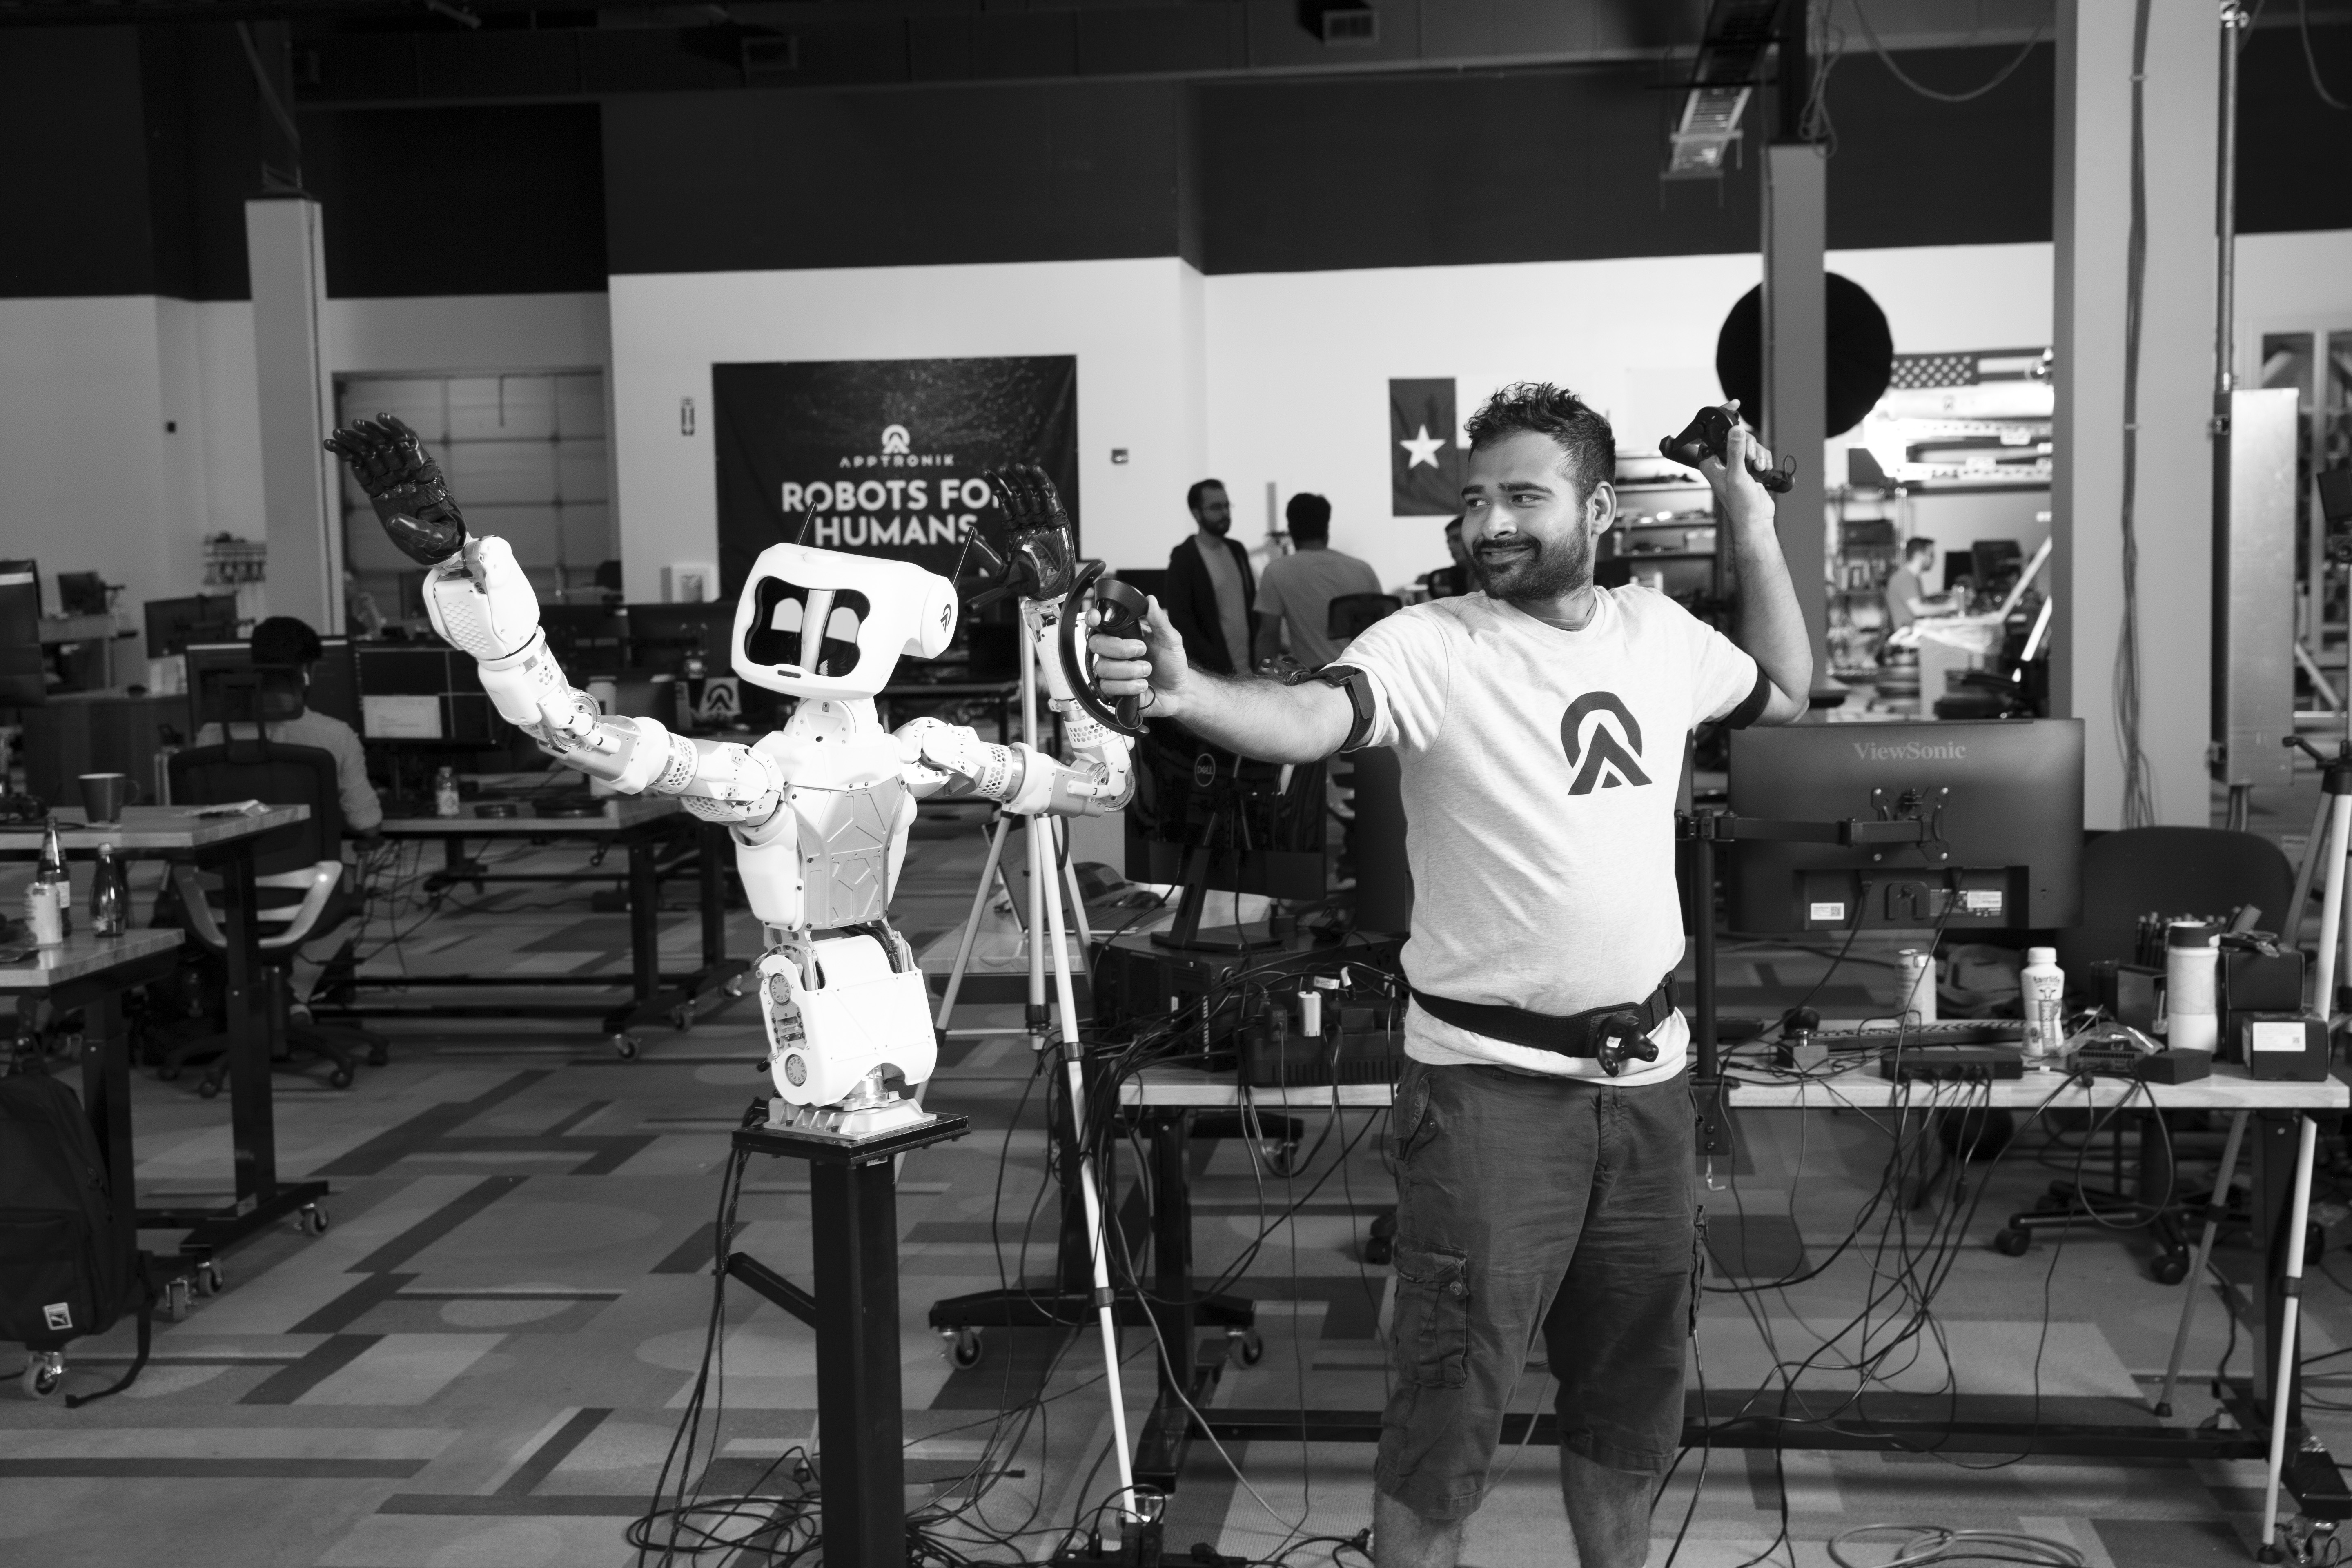 Apptronik black and white photo of Ravi gesturing with a robot.